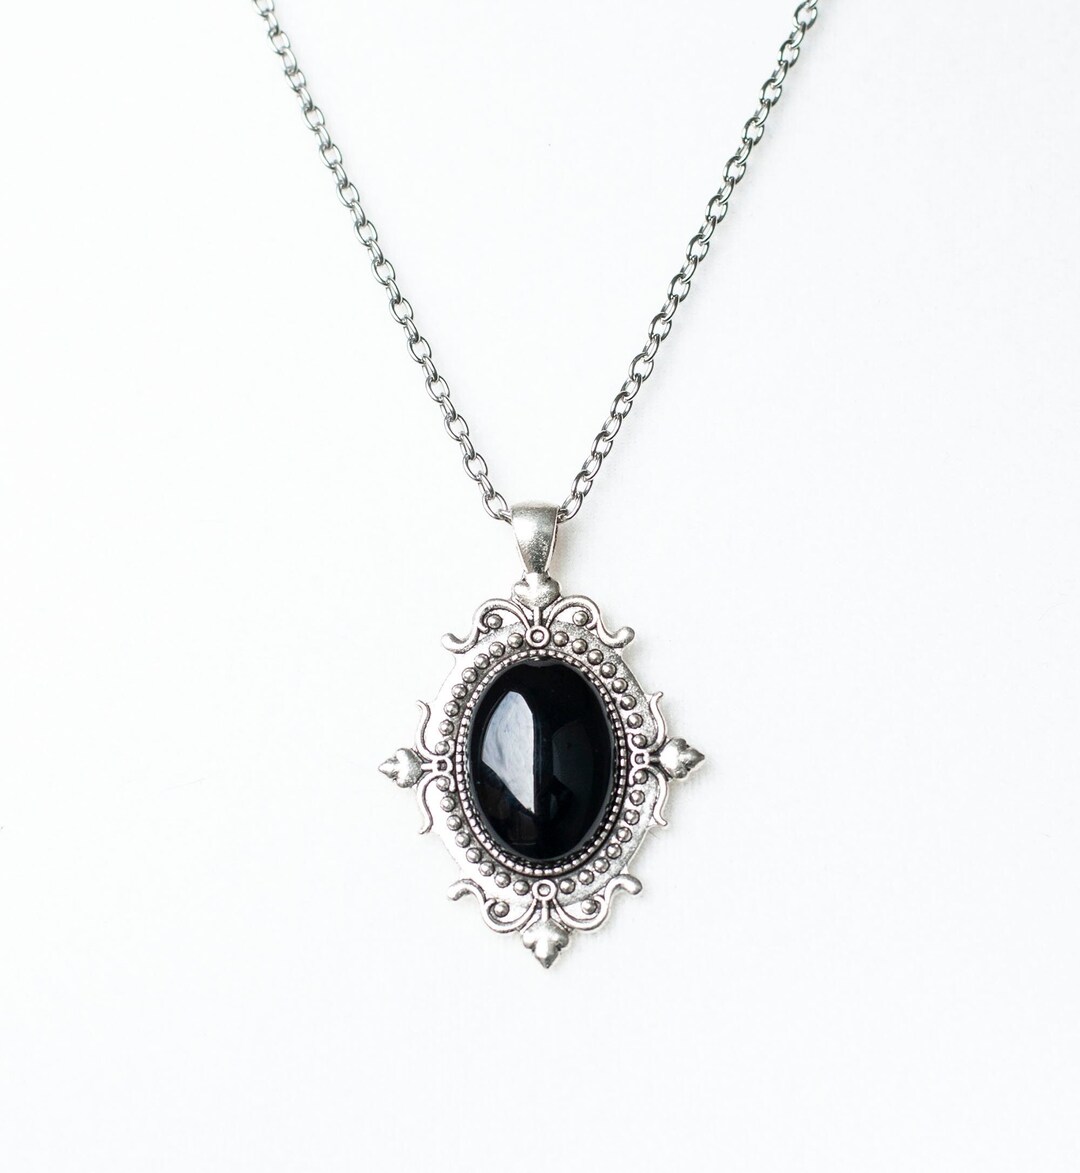 Gothic Necklace With Black Onyx Pendant-victorian Cameo Necklace With ...